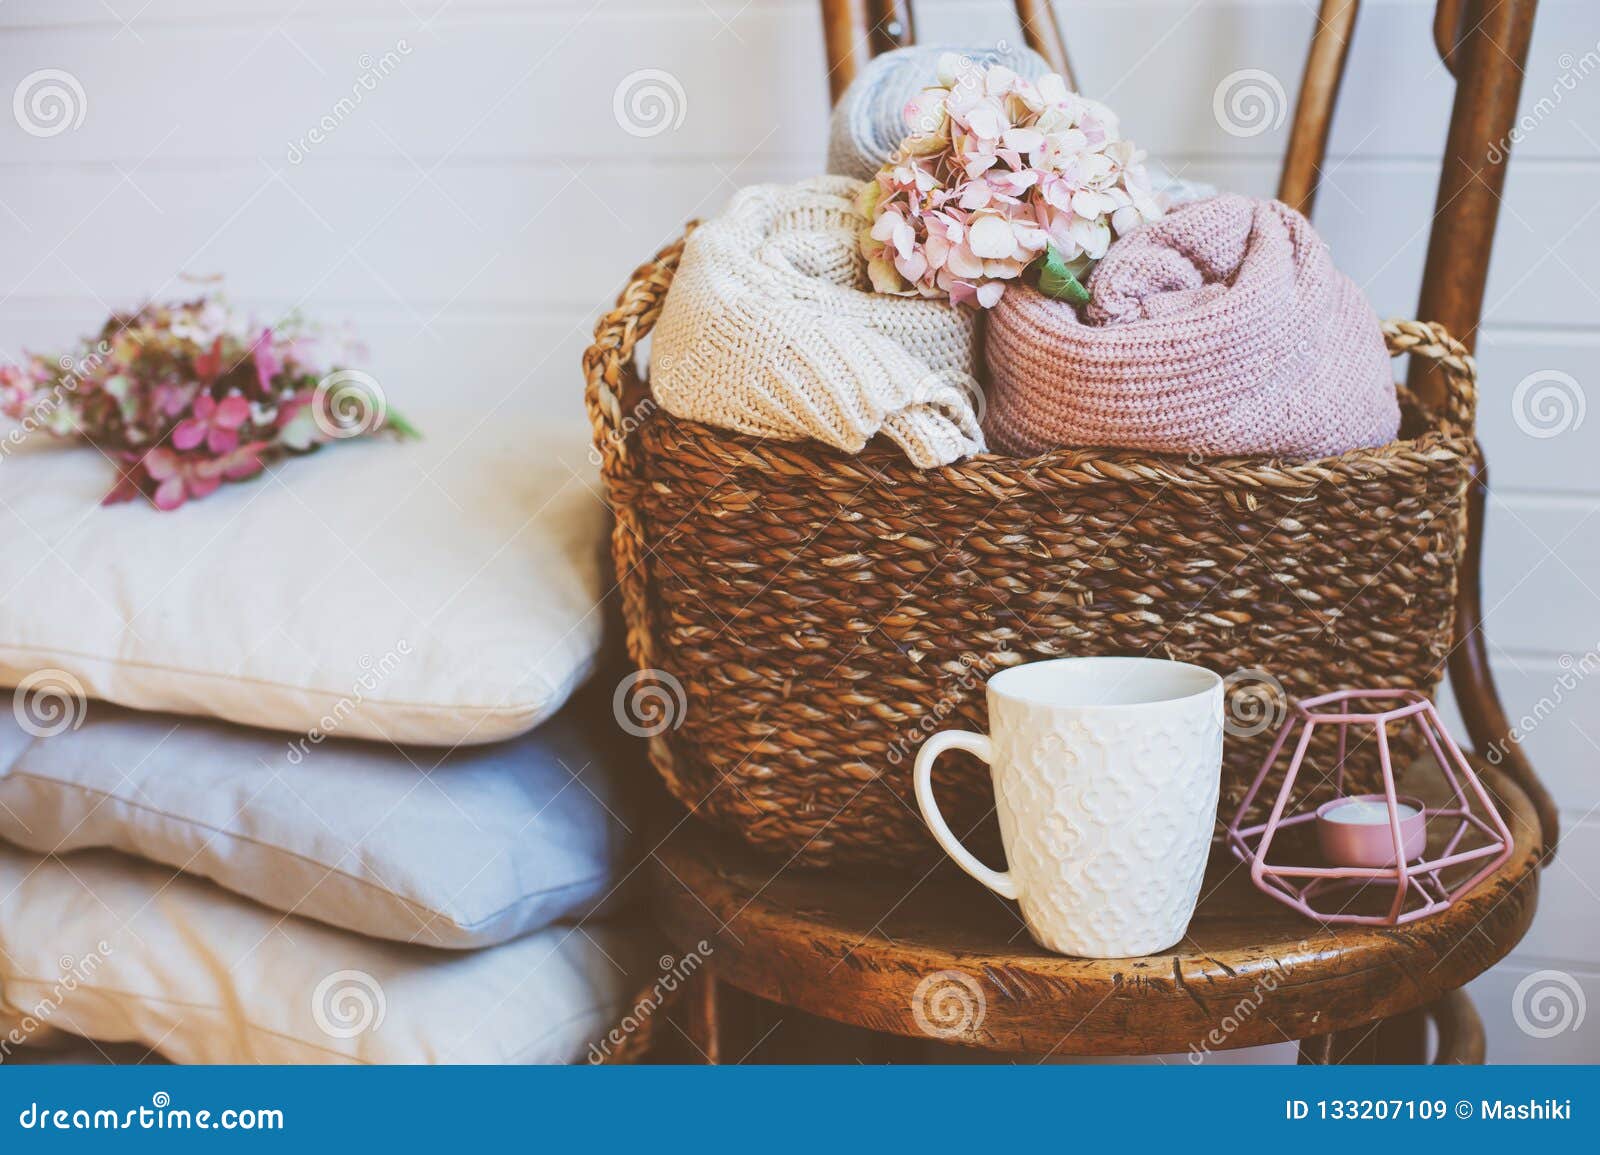 cozy still life interior details. organizing clothes in wicker baskets